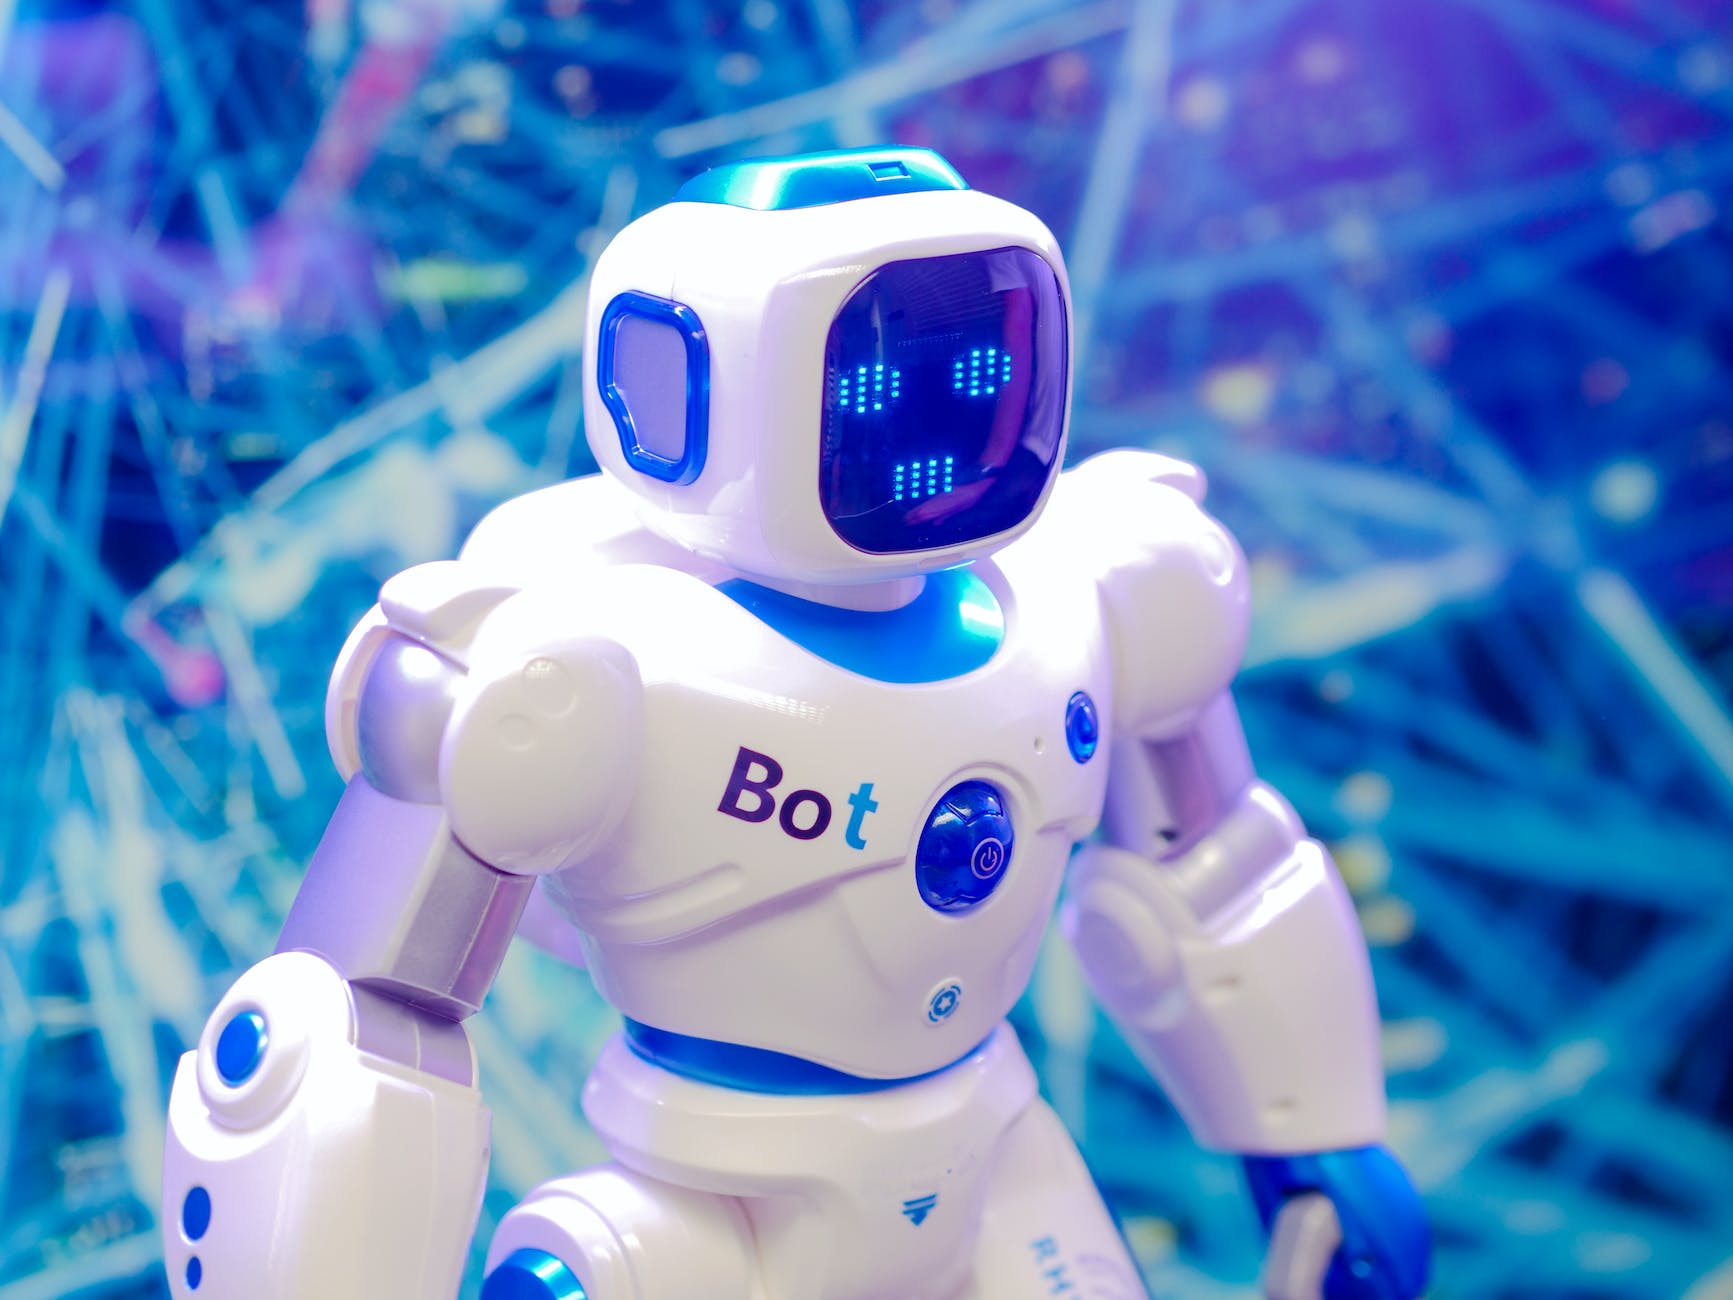 Photo by Kindel Media on <a href="https://www.pexels.com/photo/white-and-blue-robot-toy-on-blue-string-lights-8566467/" rel="nofollow">Pexels.com</a>